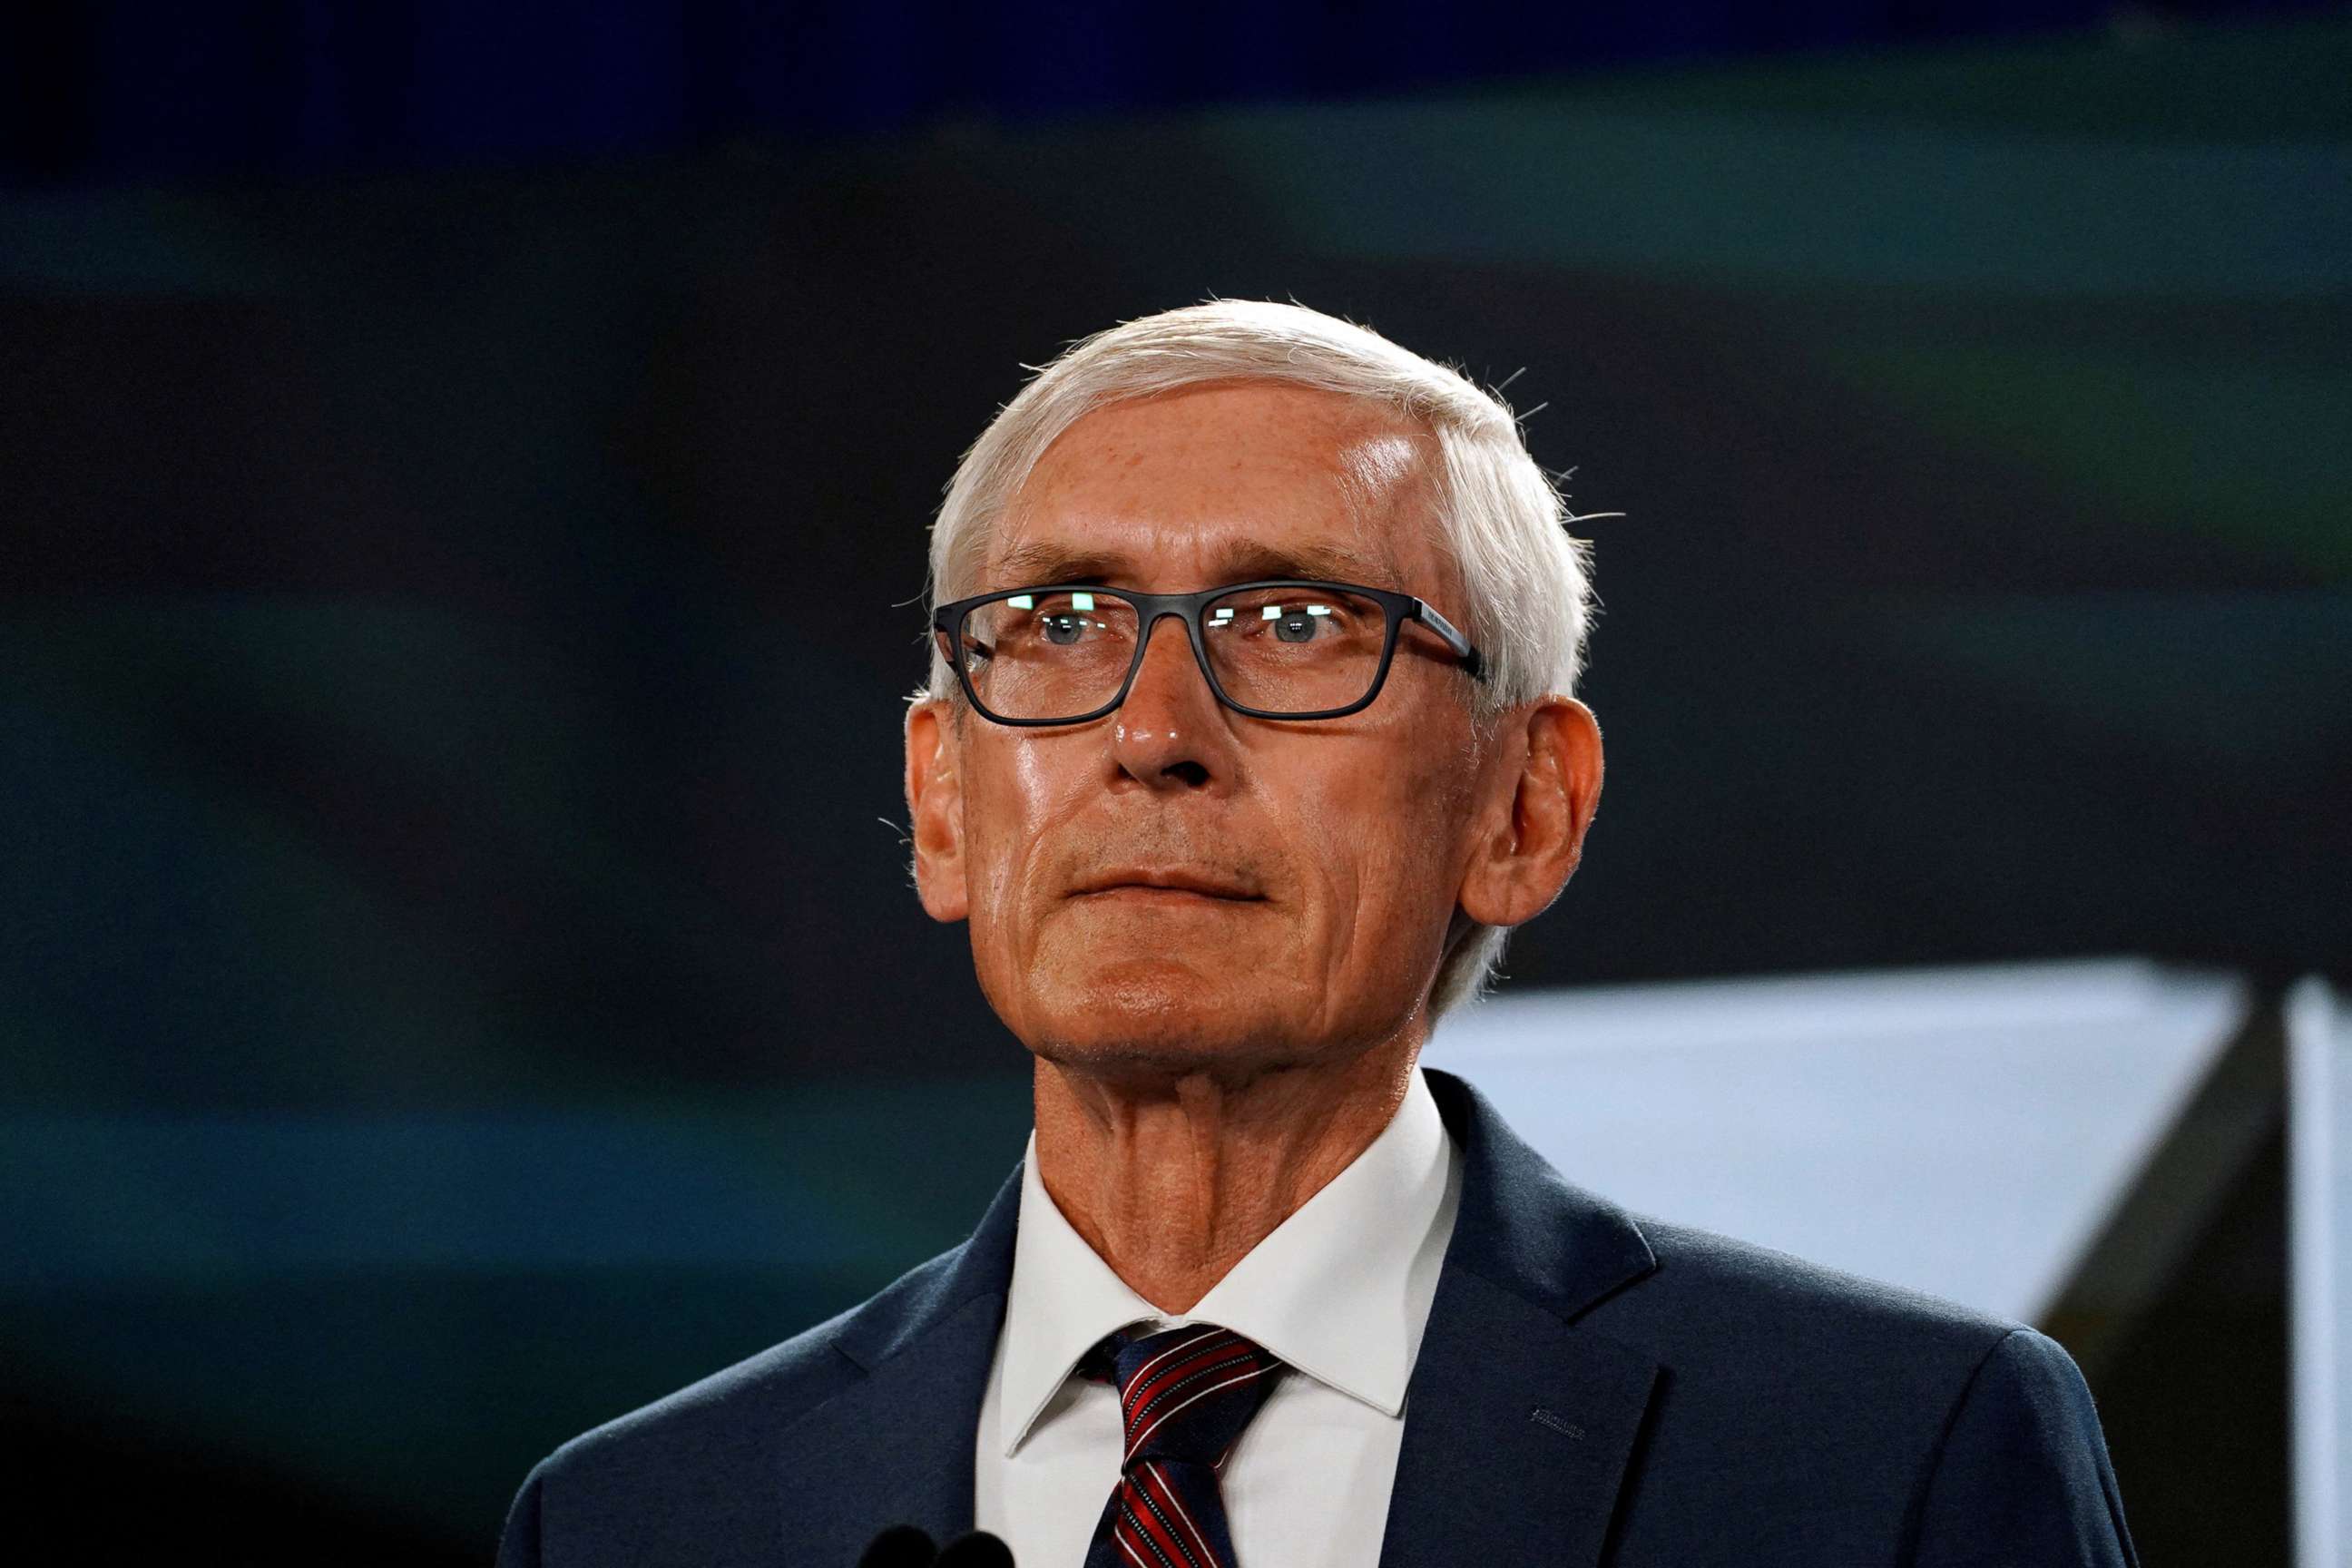 PHOTO: Wisconsin Governor Tony Evers waits to speak on the third day of the Democratic National Convention at the Wisconsin Center in Milwaukee, Aug. 19, 2020.